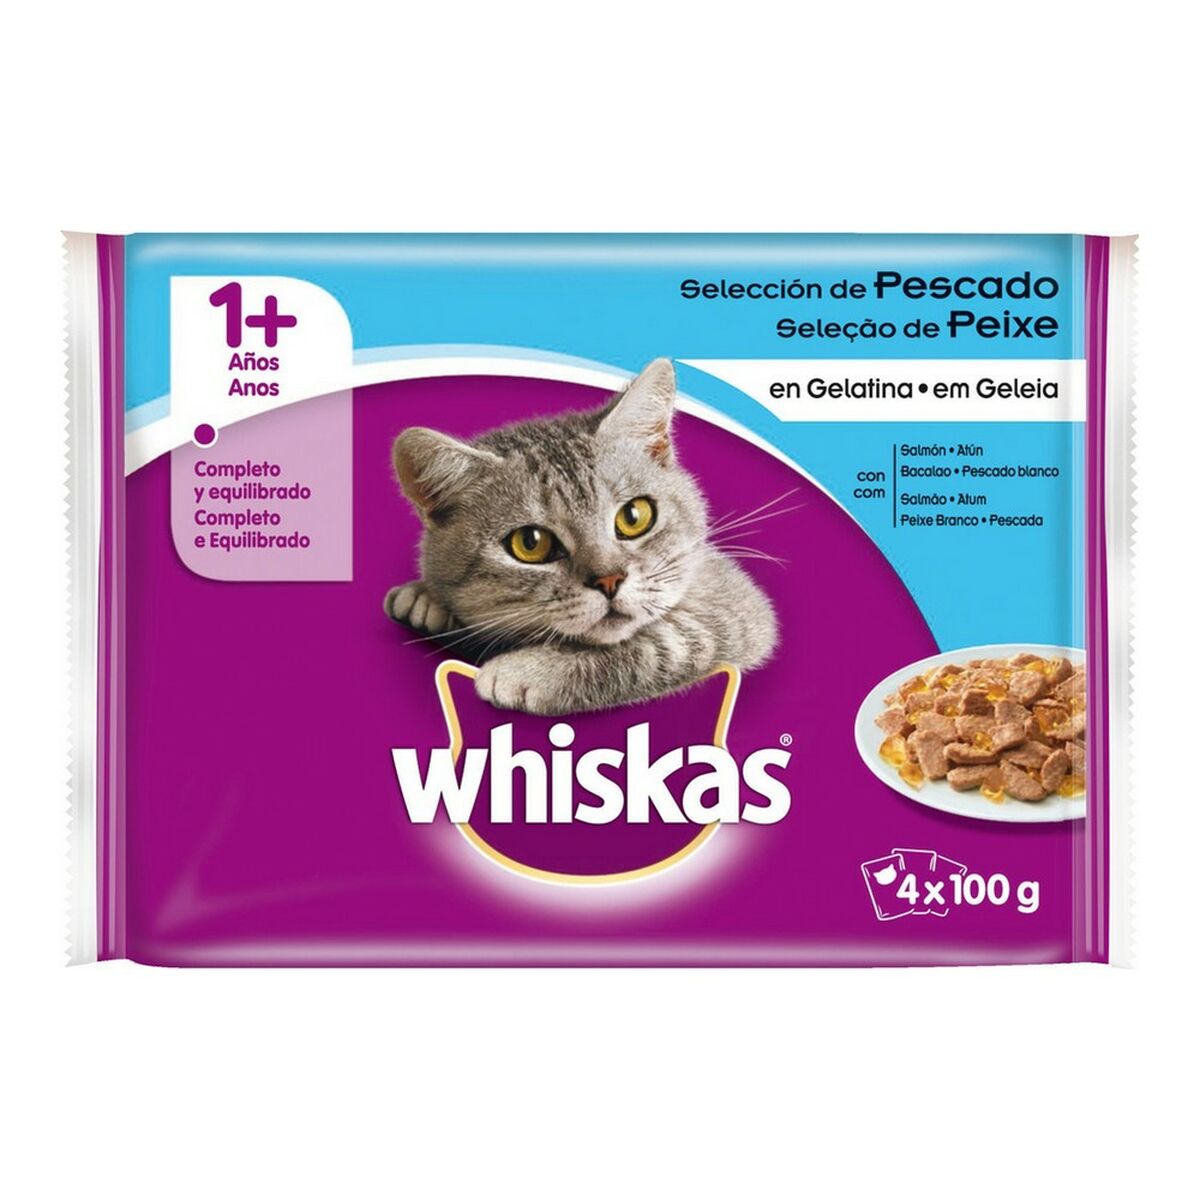 Aliments pour chat Whiskas 150810 (4 x 100 g)